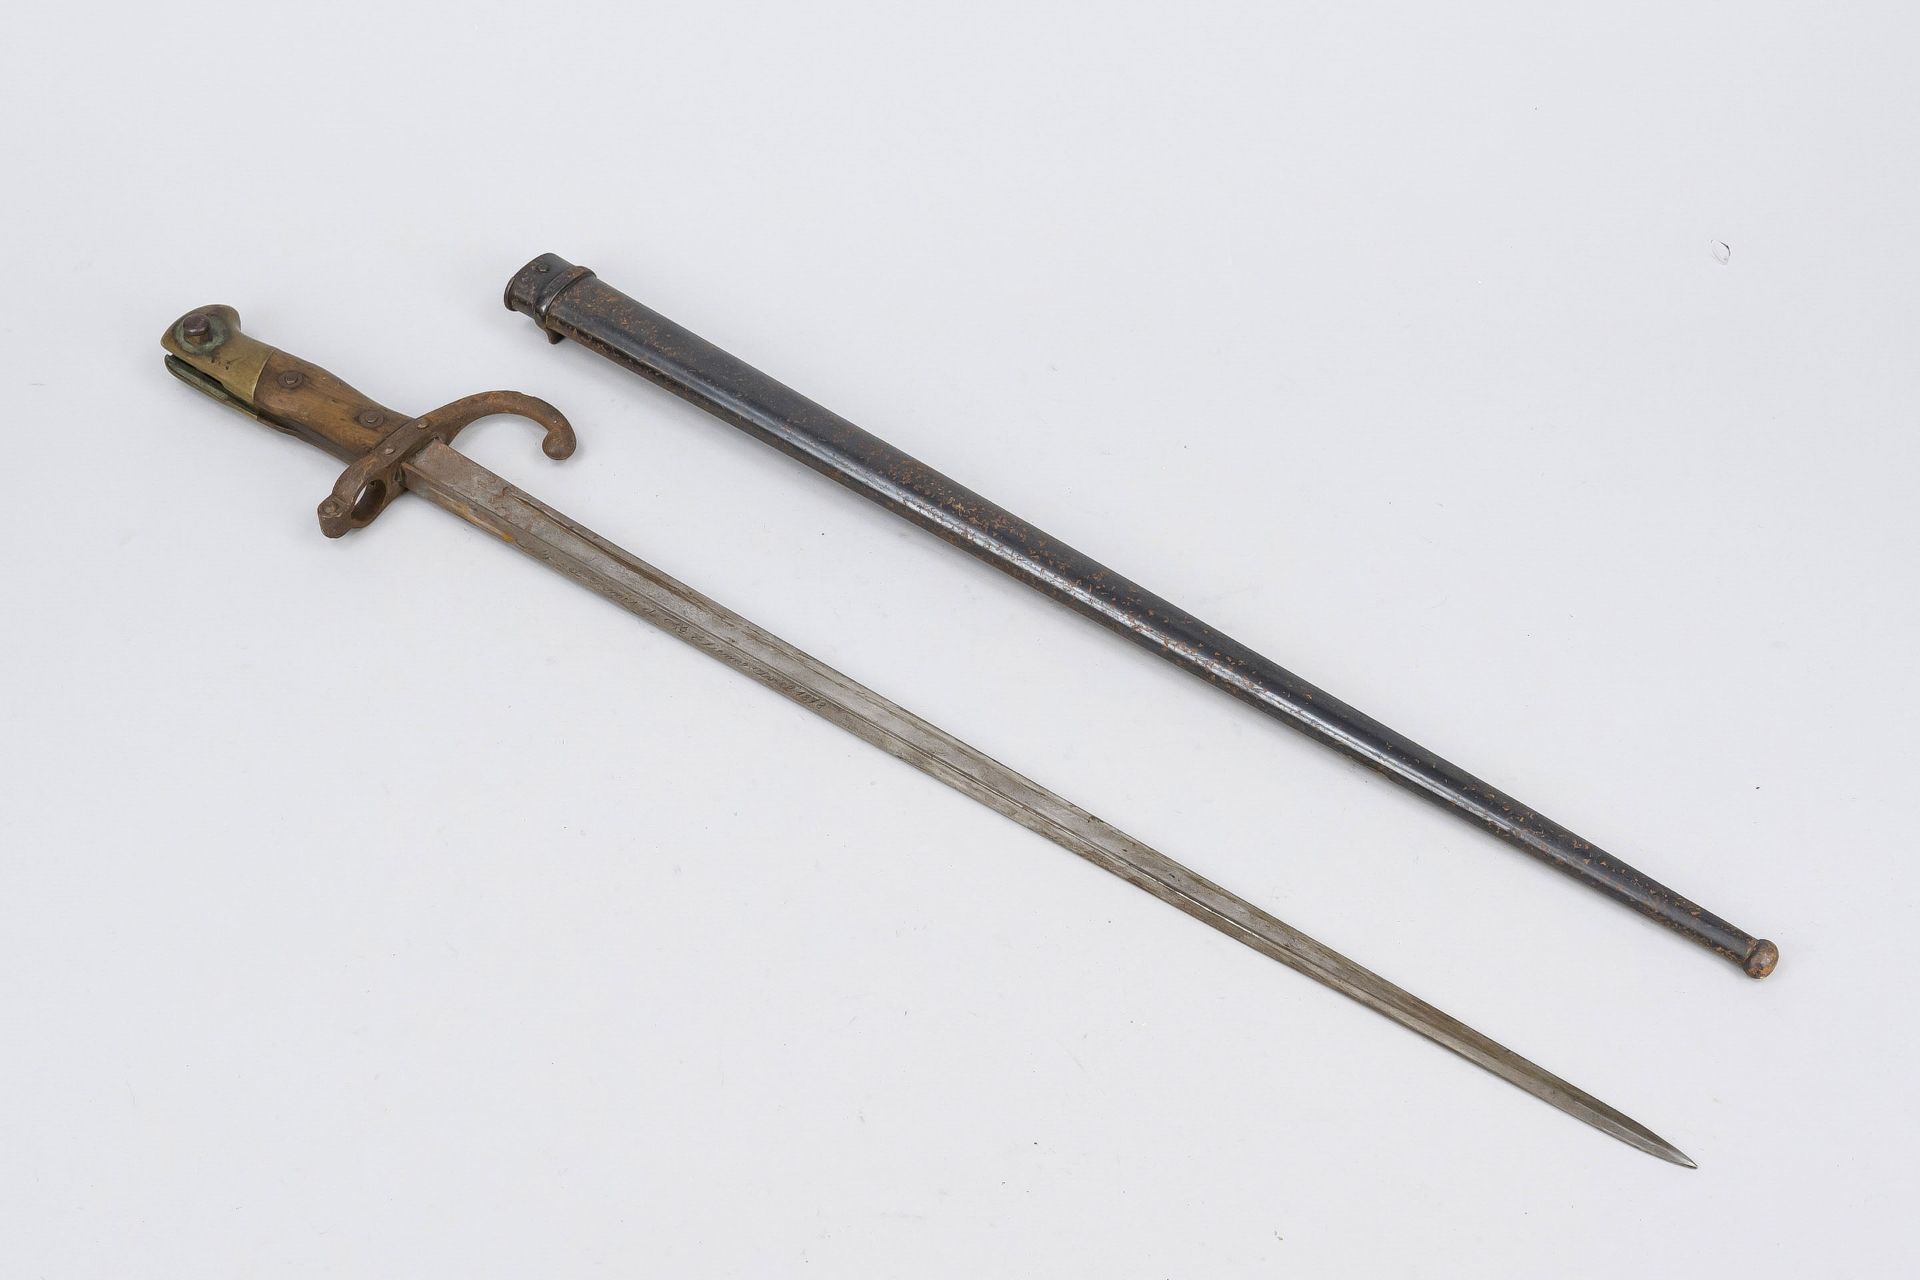 Bayonet, 2nd half 19th century, France. Model M1874. Straight single-edged blade with broad T-shaped